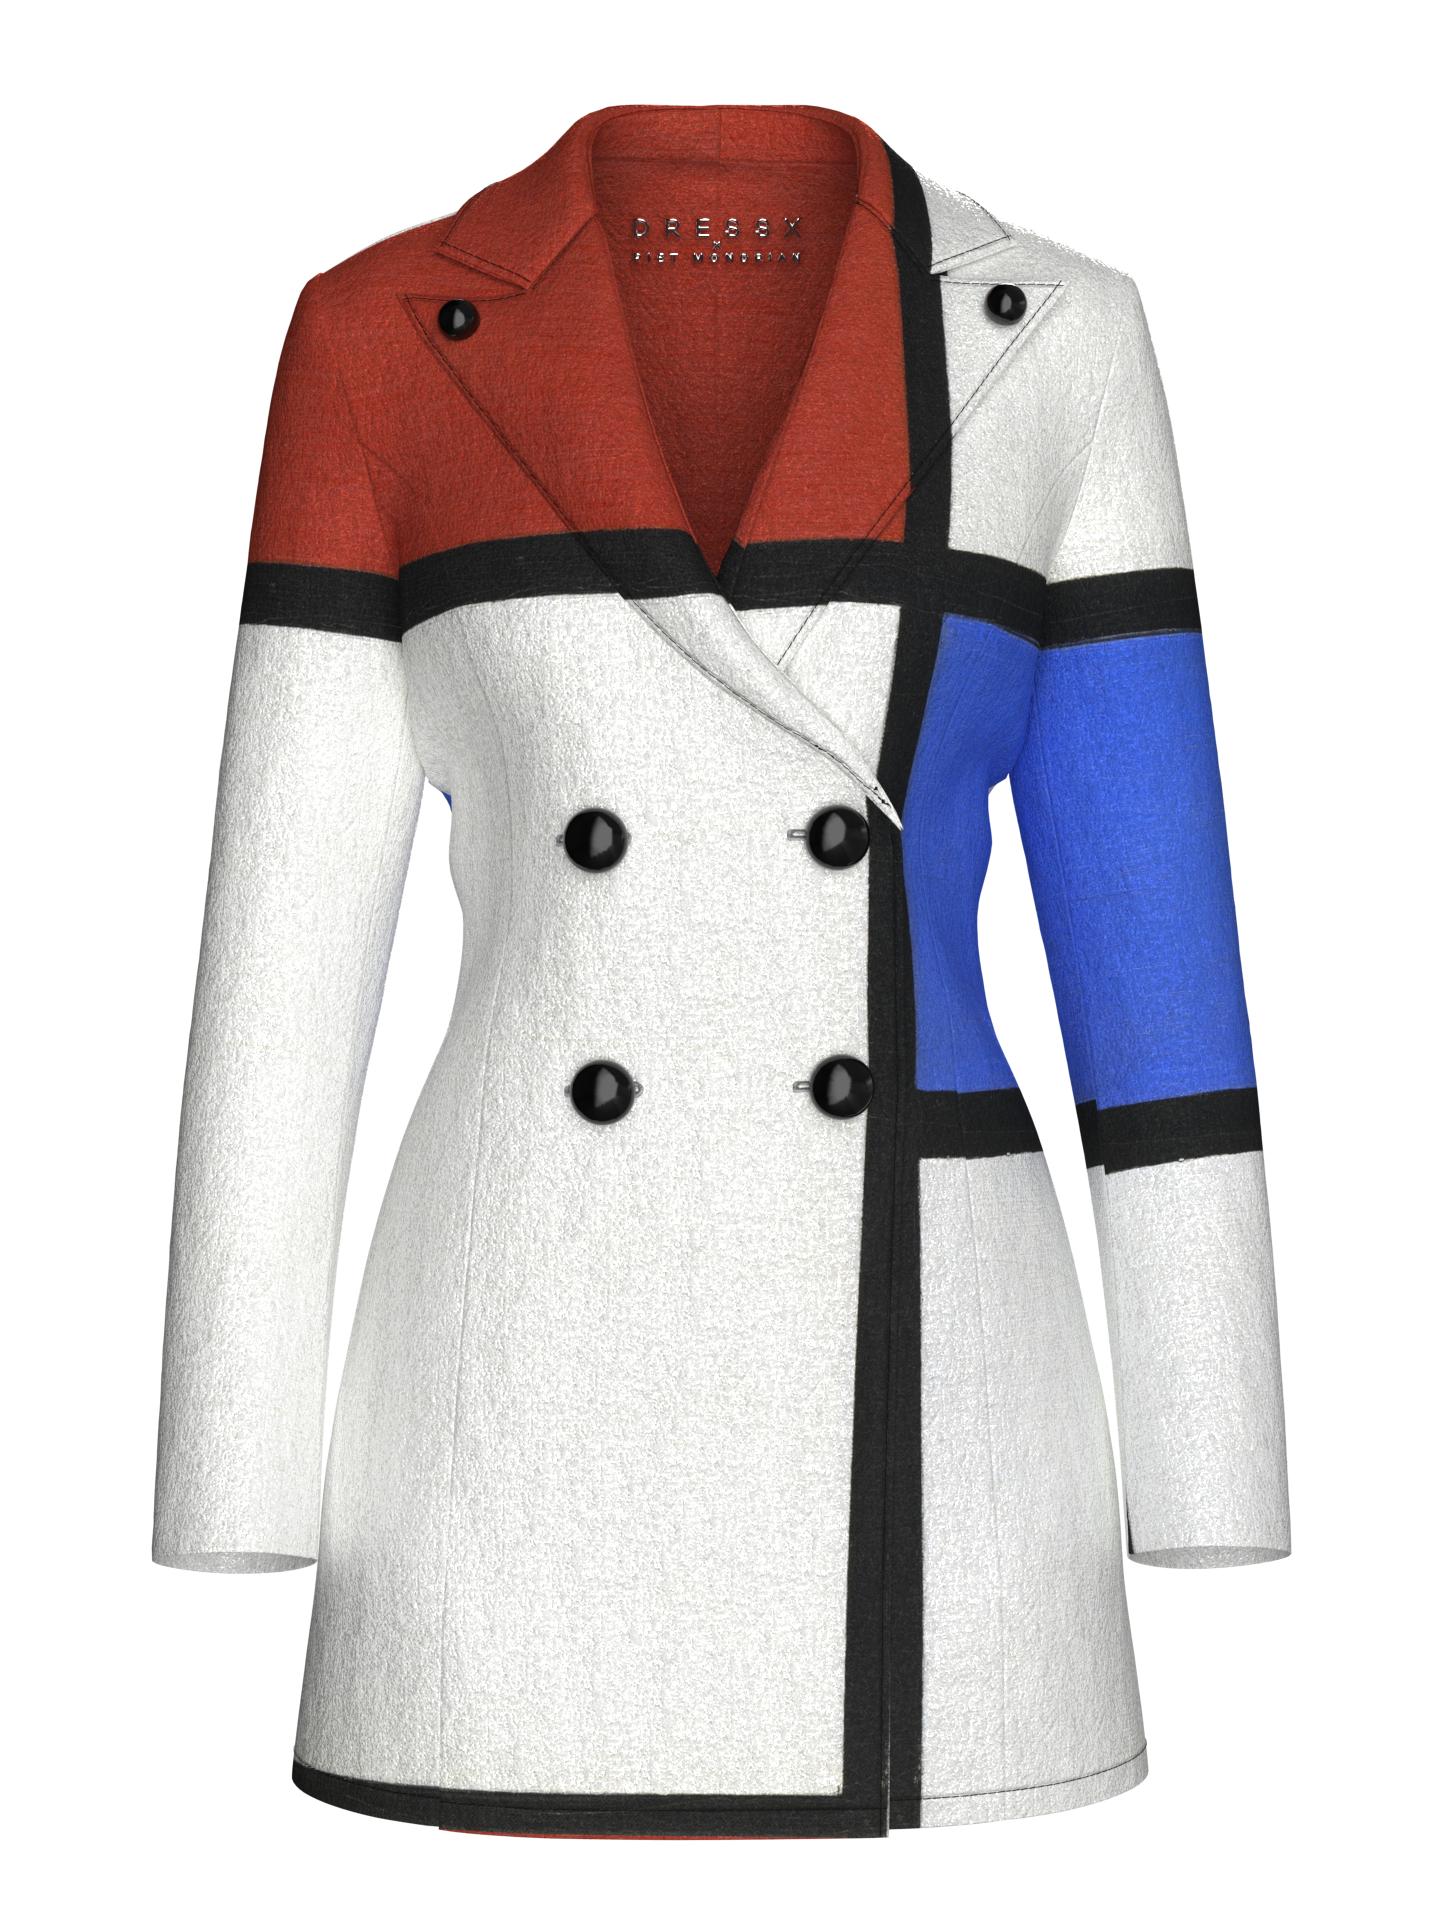 Blazer Dress- Composition No. II with Red and Blue by DRESSX PIET MONDRIAN